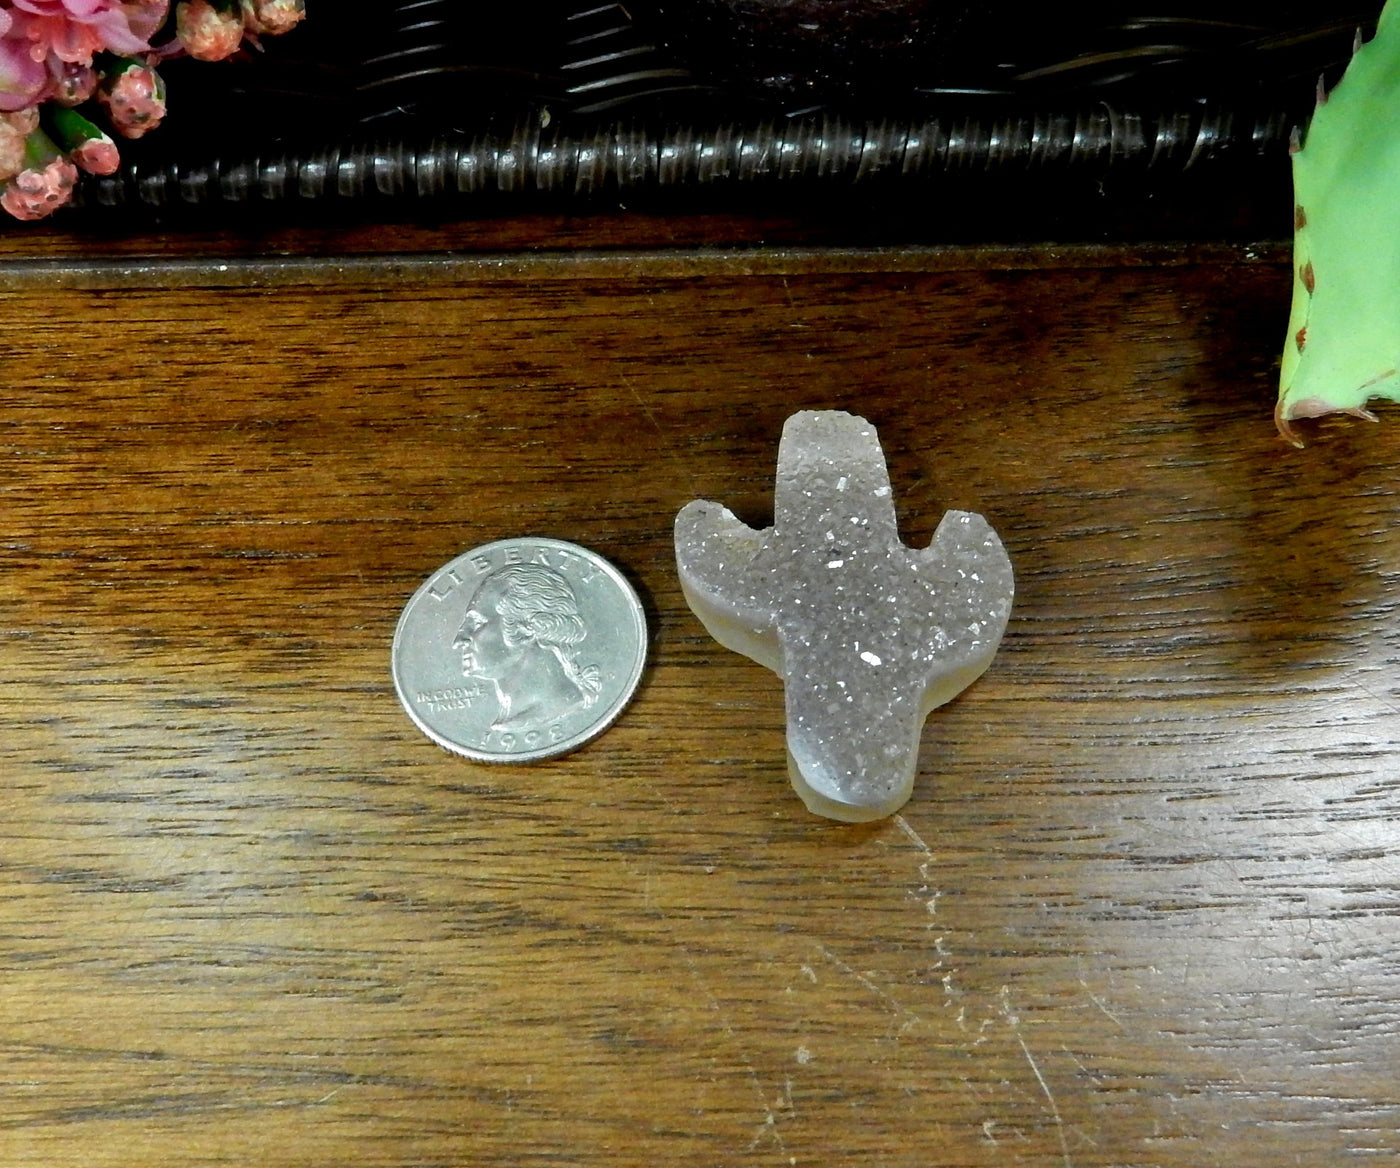 Druzy cactus cabochon next to quarter for size reference